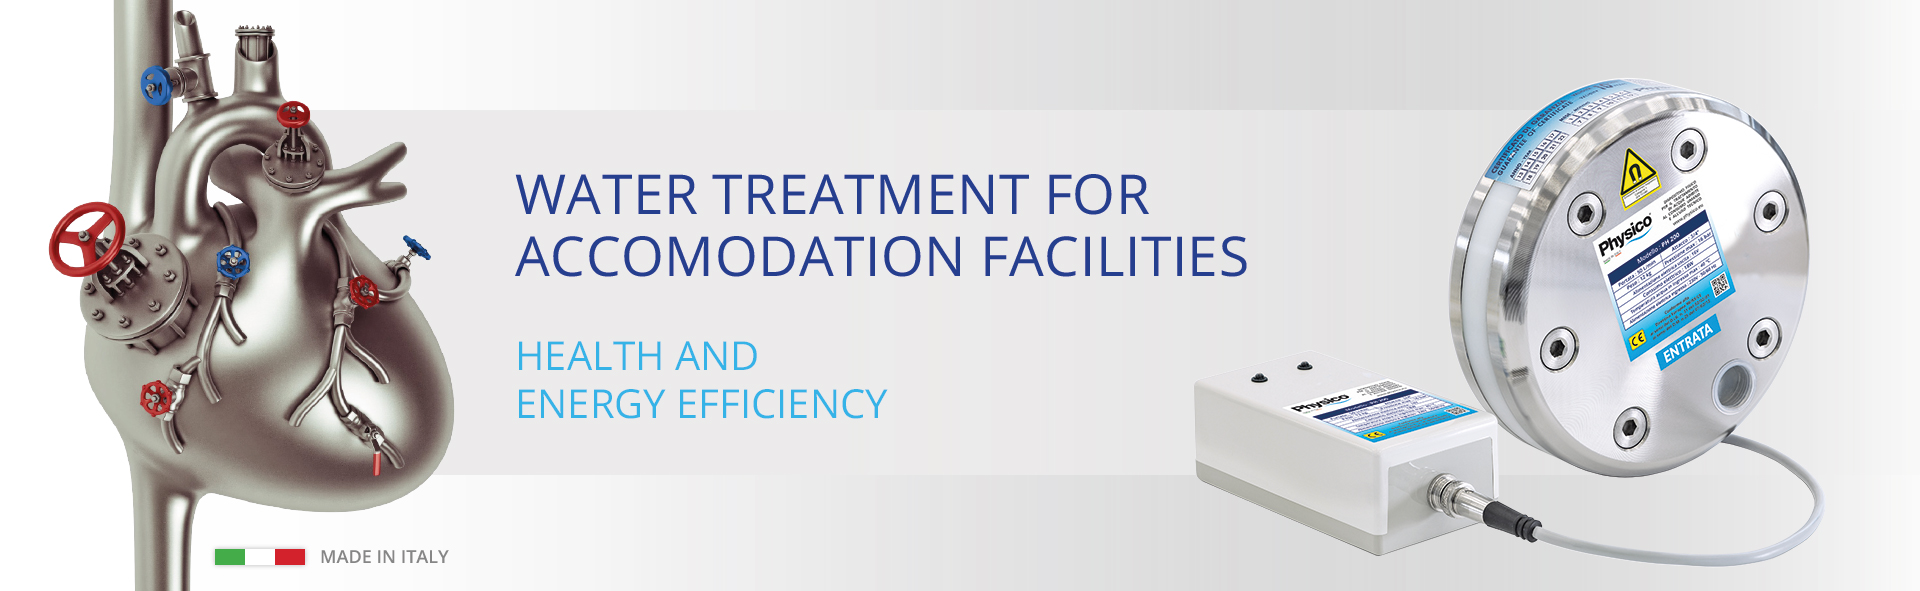 Water treatment for acoomodation facilities